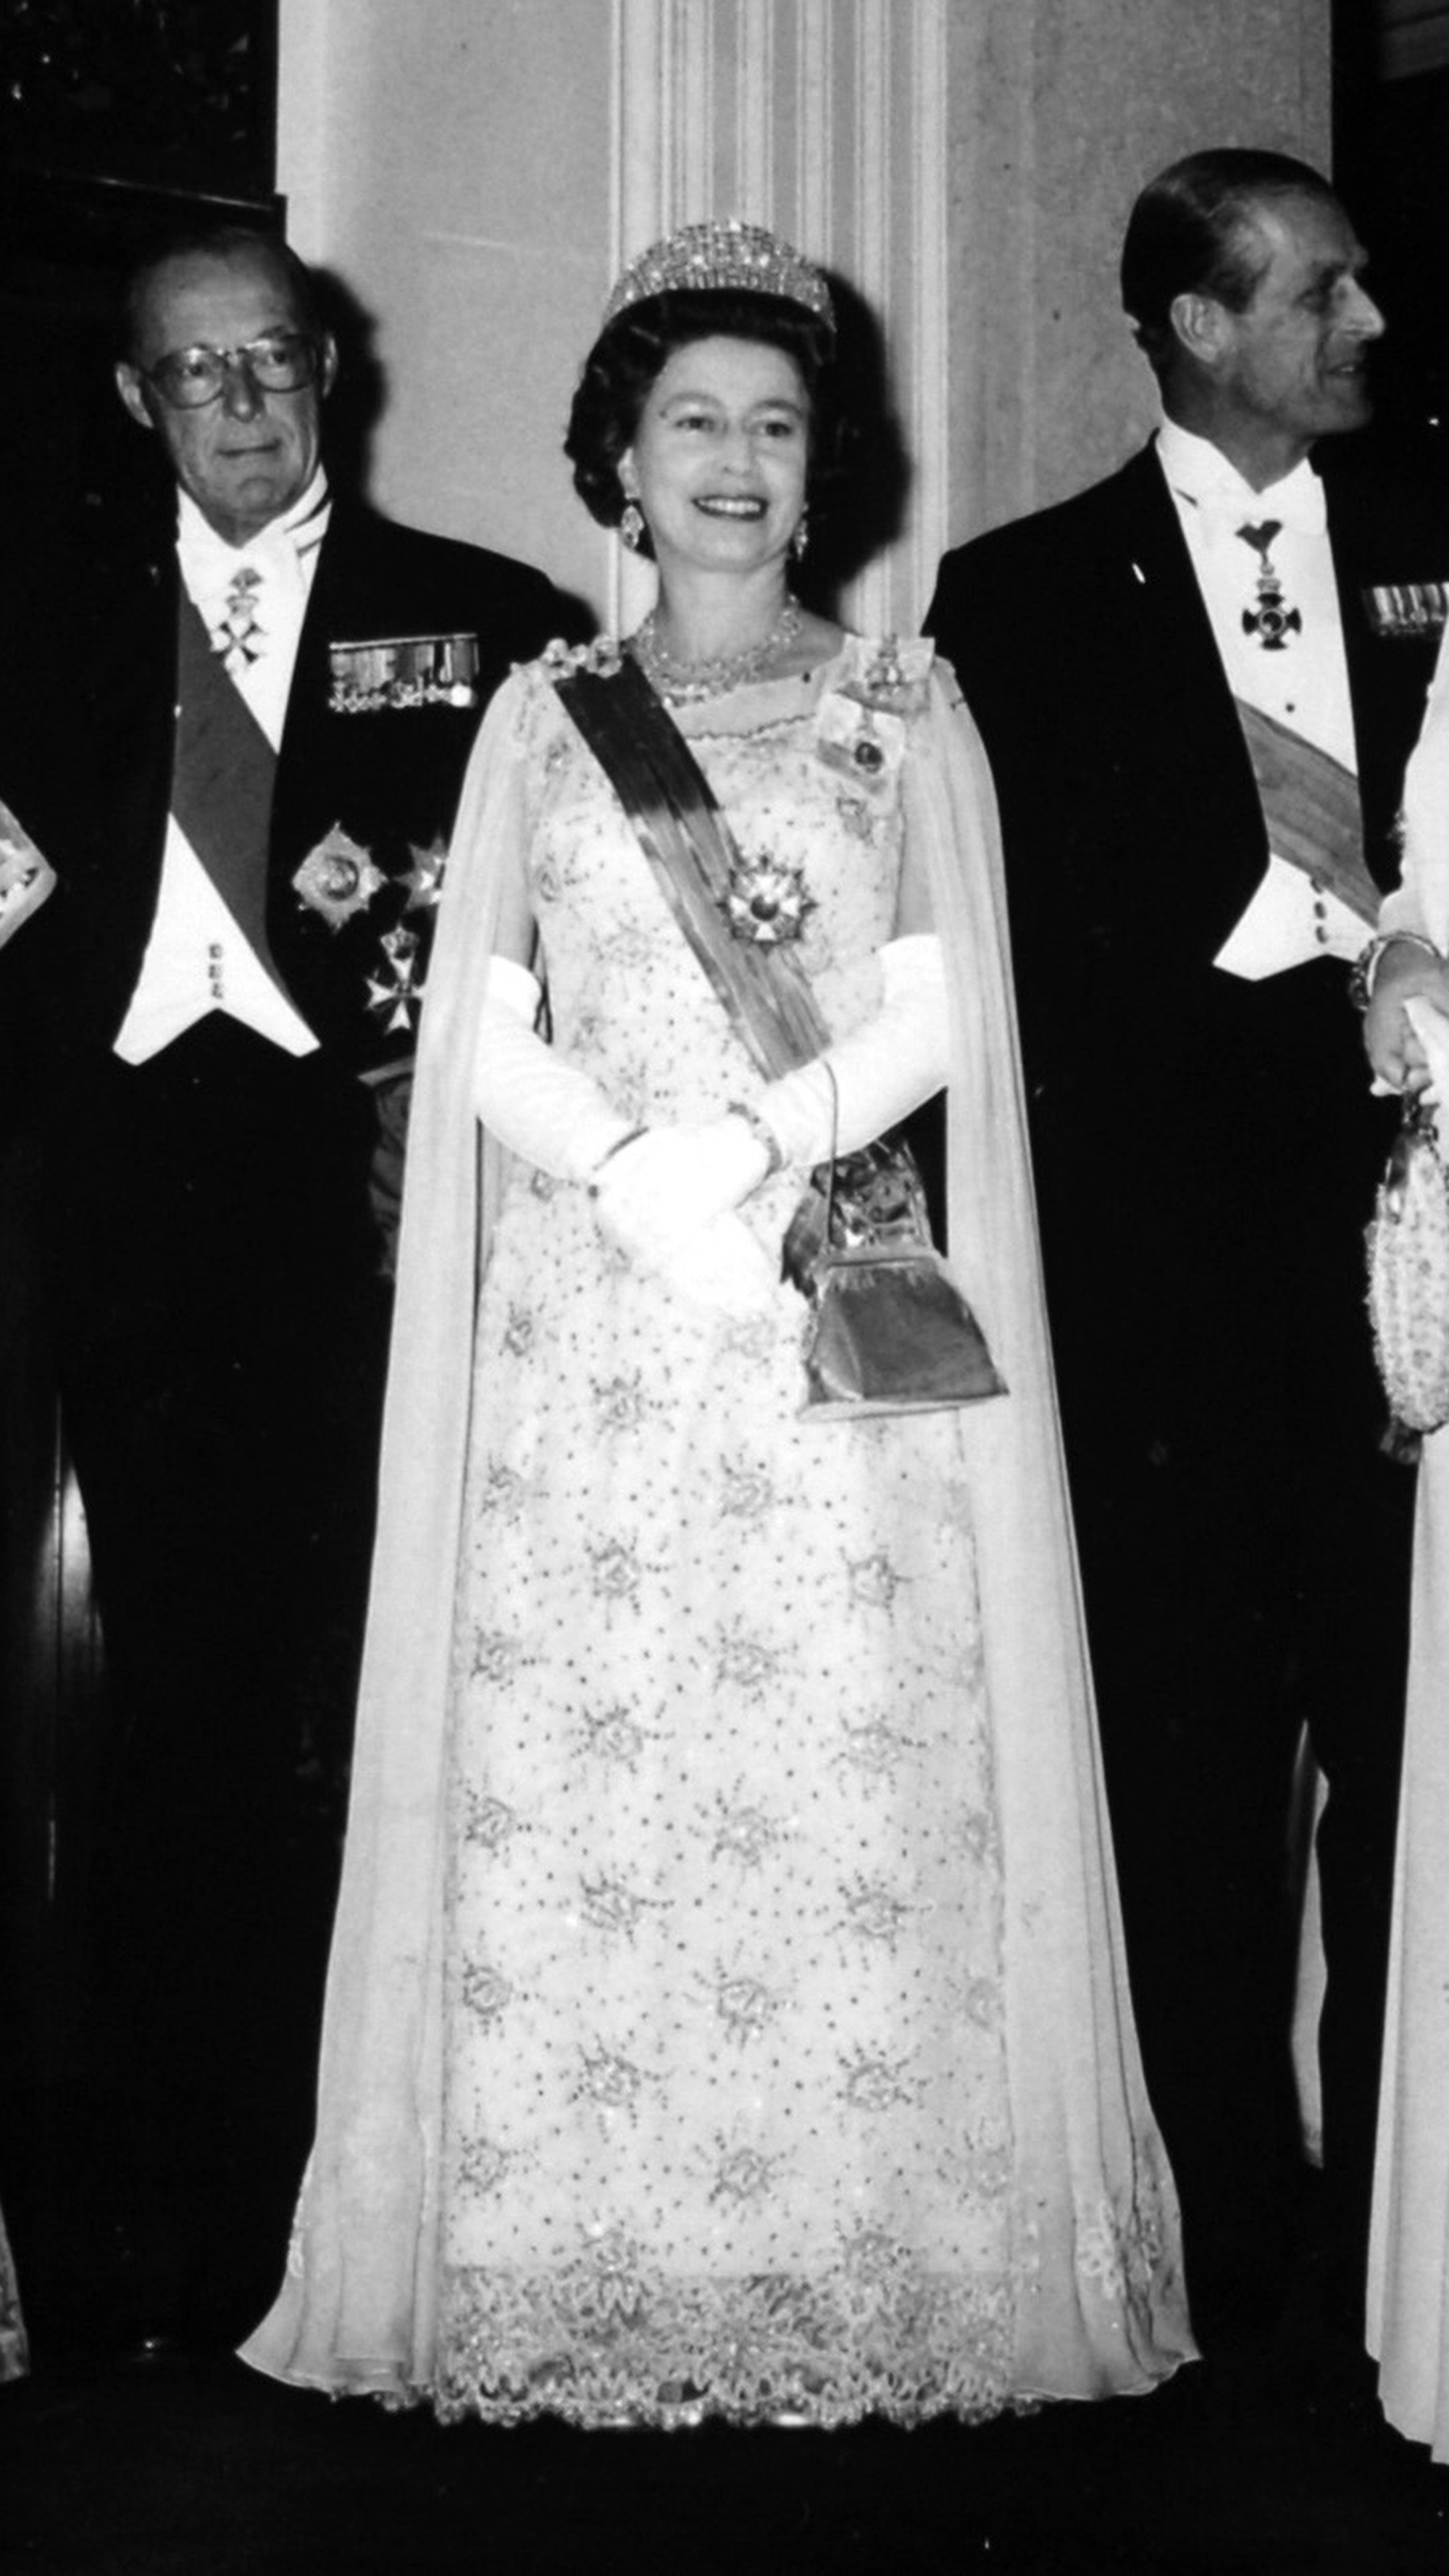 Queen Elizabeth II arriving at a state banquet in 1972